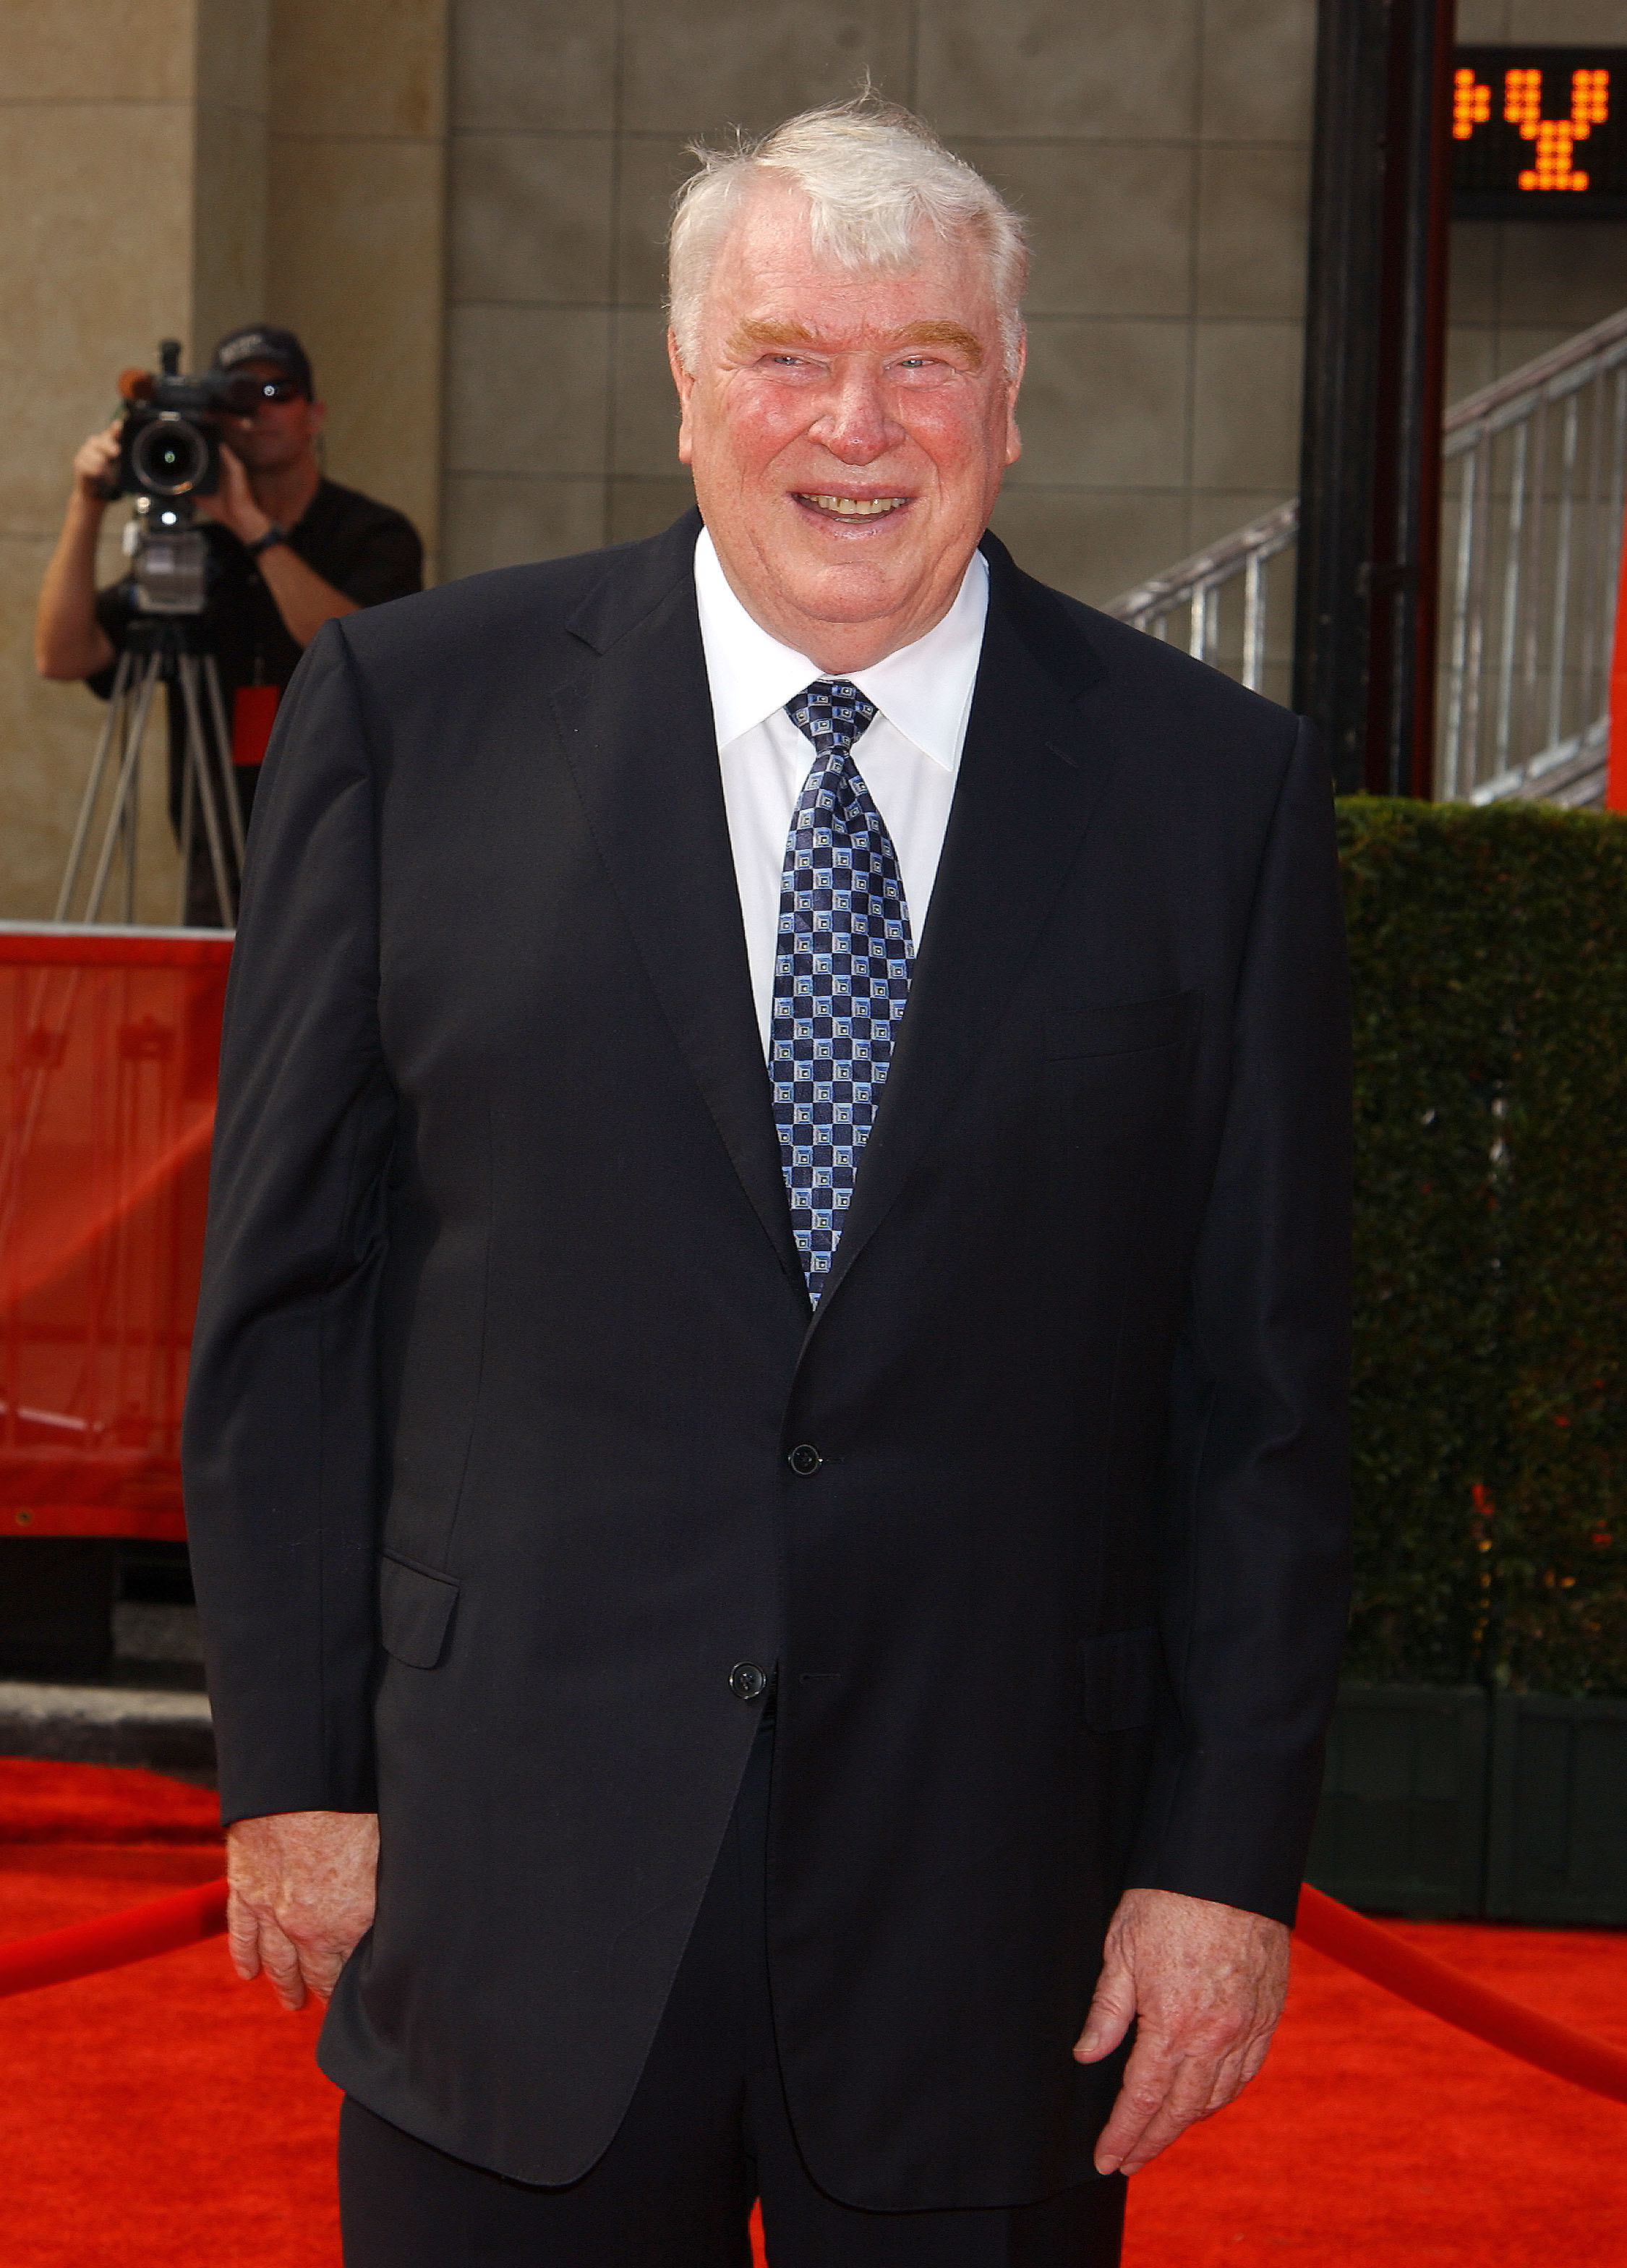 John Madden attend the ESPY Awards at Kodak Theatre in 2003 in Hollywood, California. | Source: Getty Images